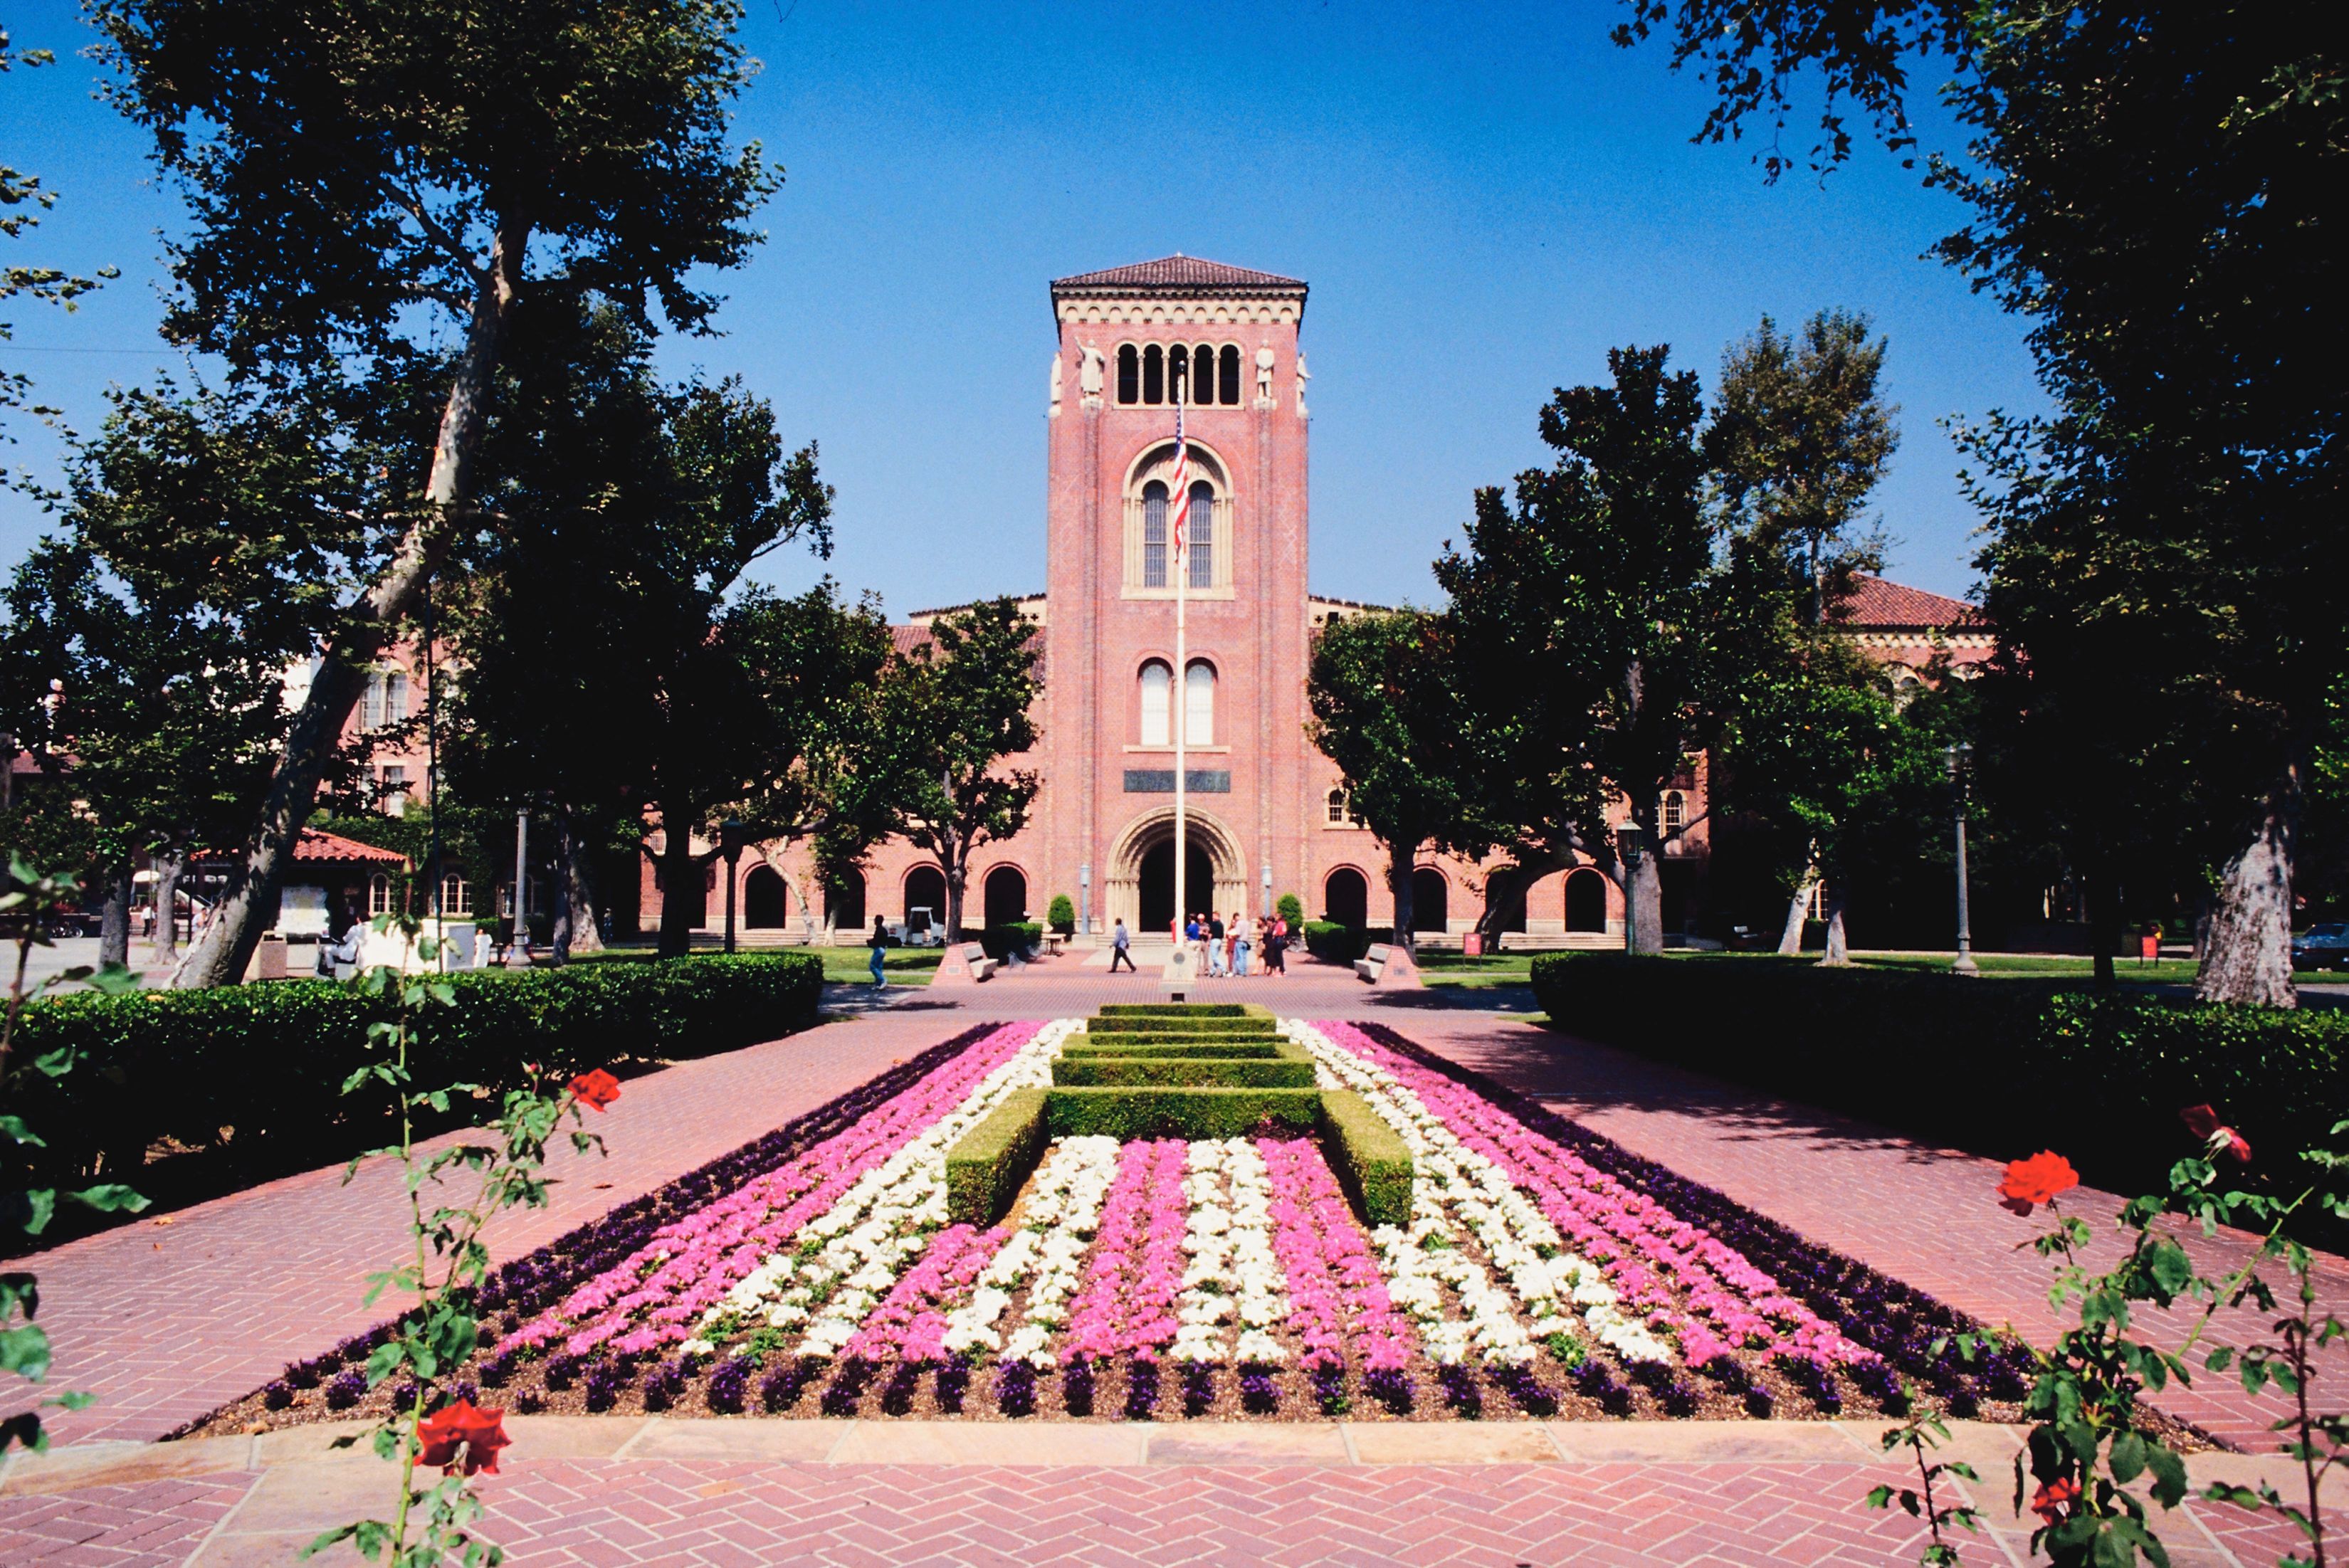 The 15 Most Expensive Colleges & Universities to Attend in the U.S.